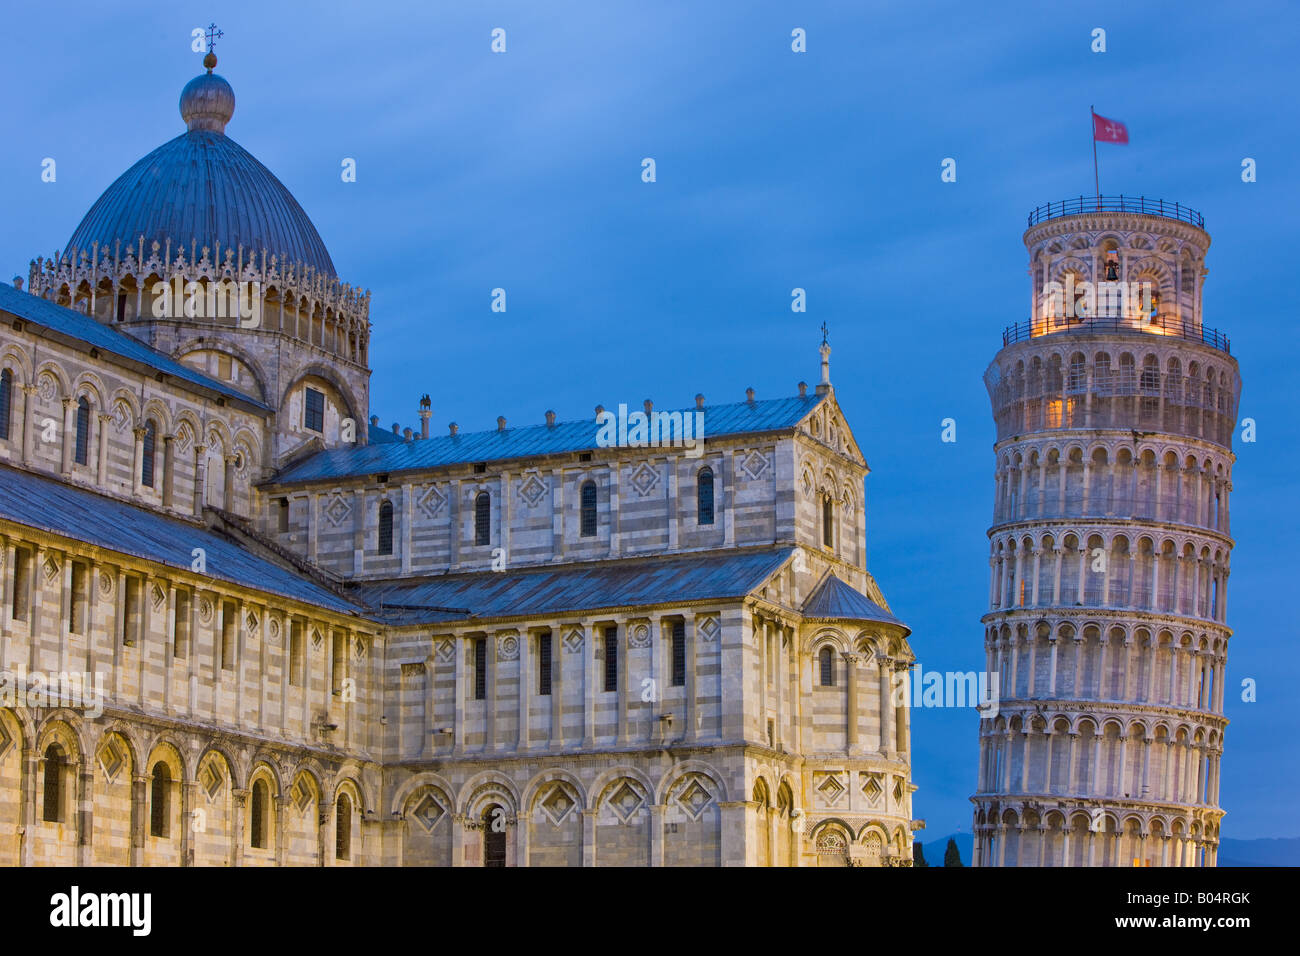 The famous leaning tower of Pisa and Pisa Duomo at dusk in Piazza del Duomo (Campo dei Miracoli), a UNESCO World Heritage Site Stock Photo